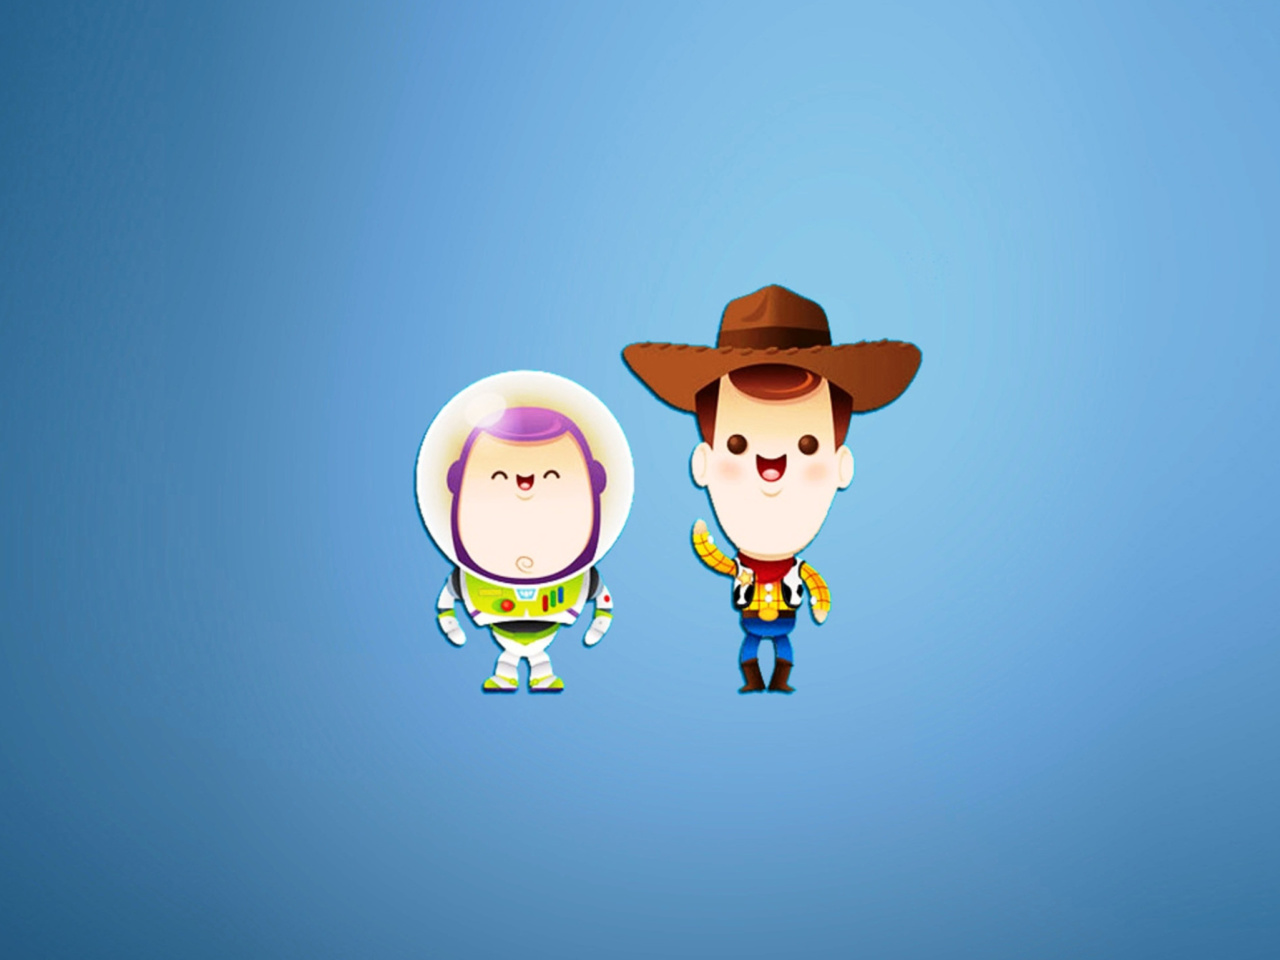 Buzz and Woody in Toy Story screenshot #1 1280x960